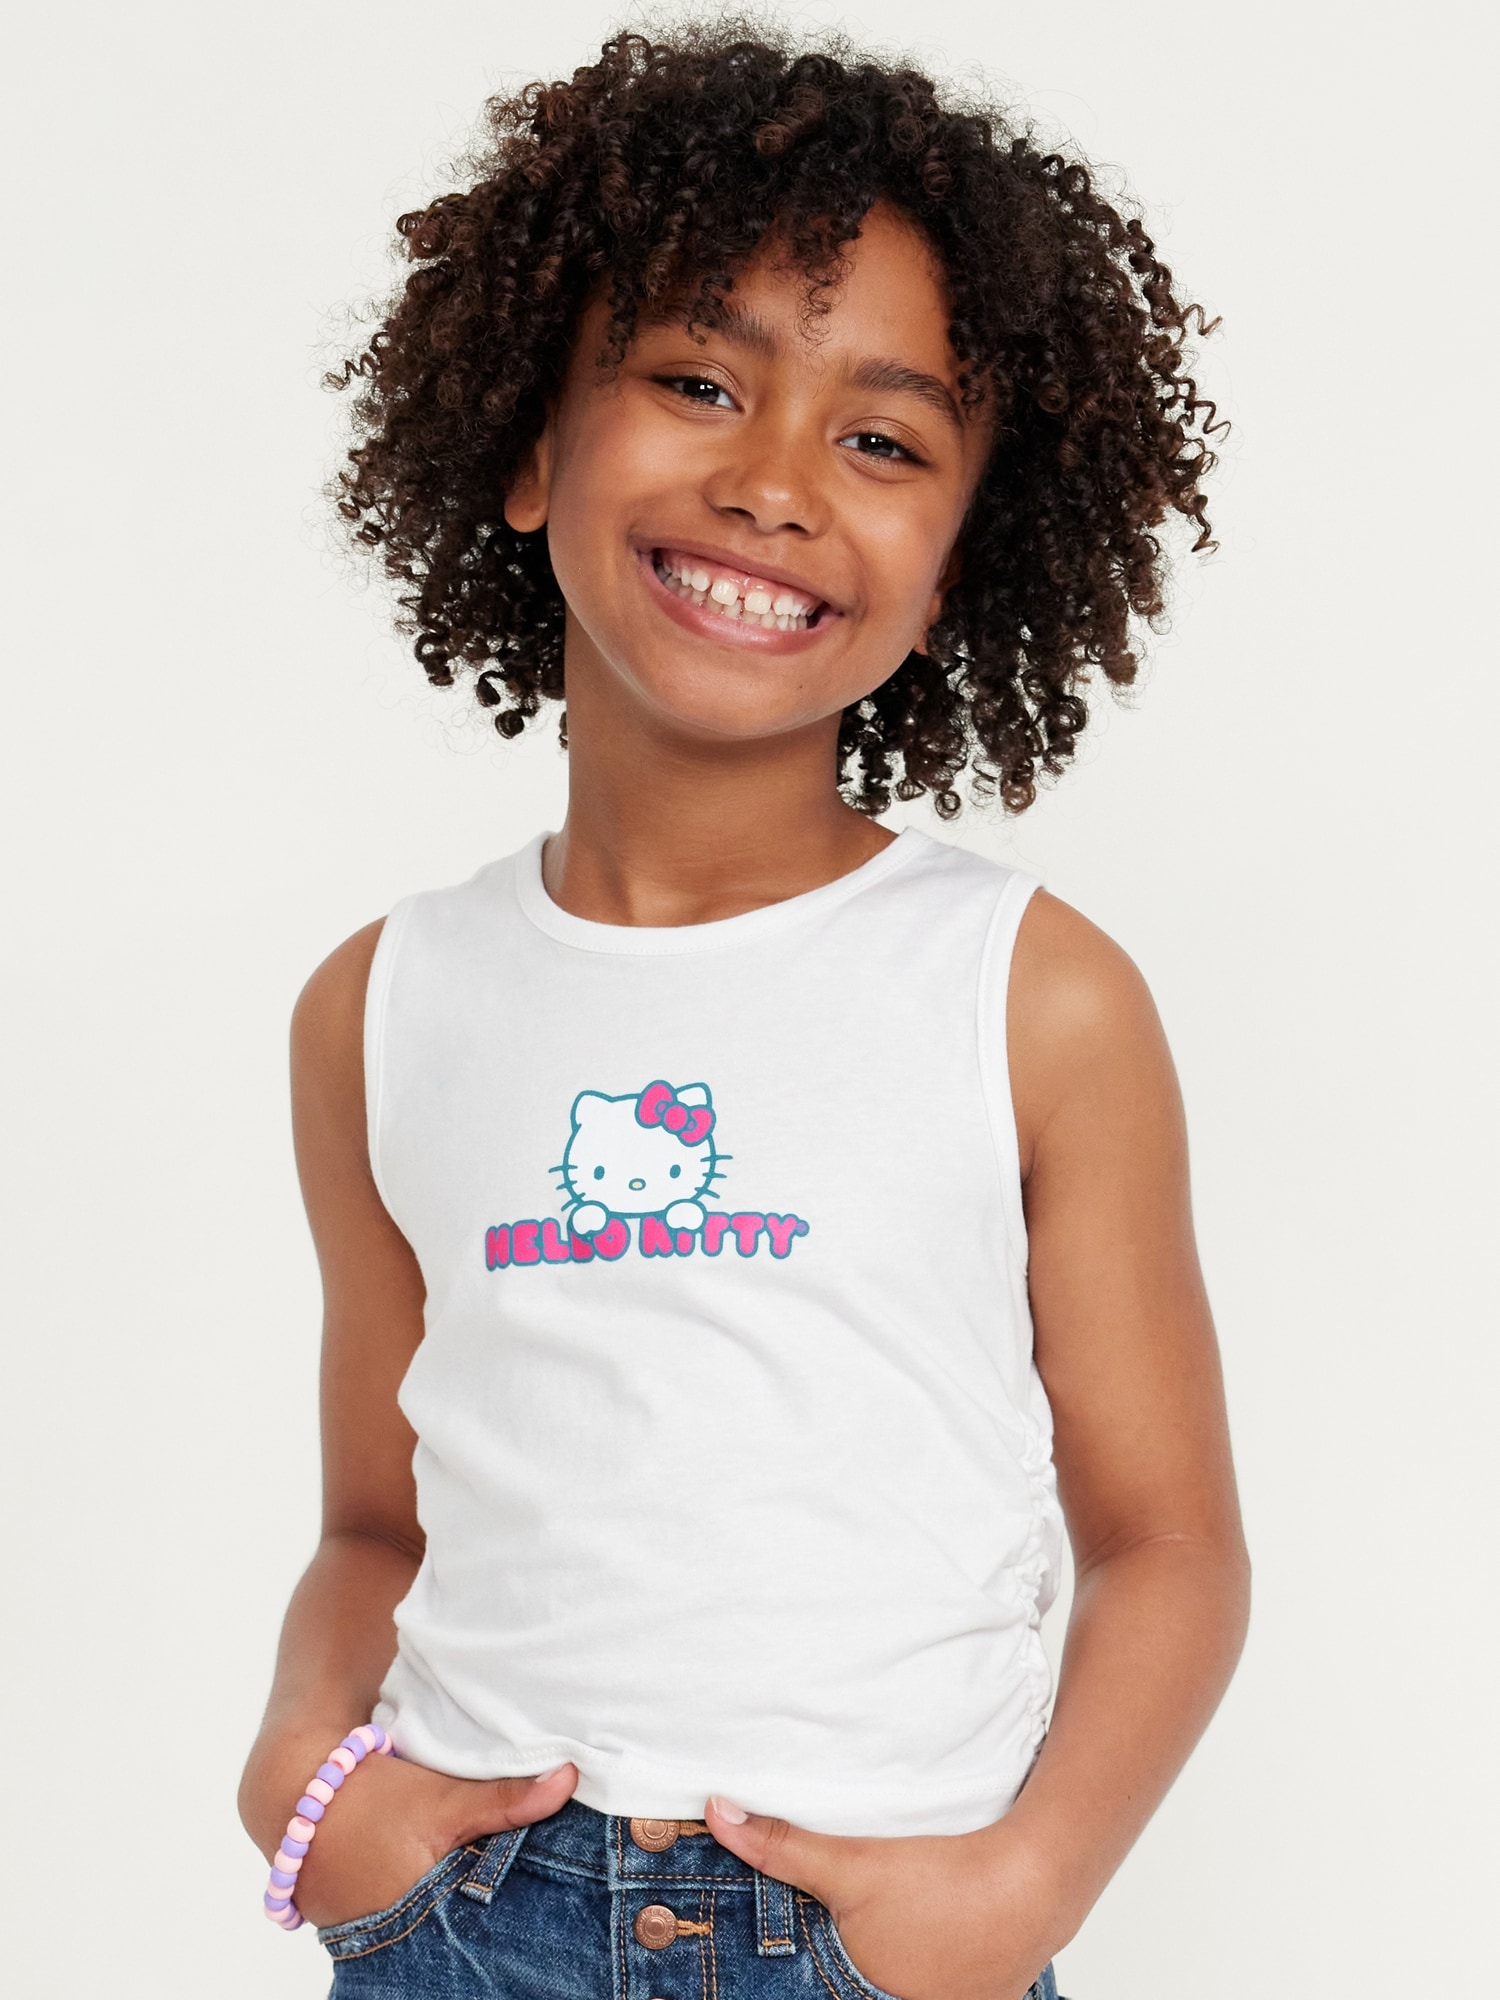 Side-Ruched Licensed Graphic Tank Top for Girls Hot Deal